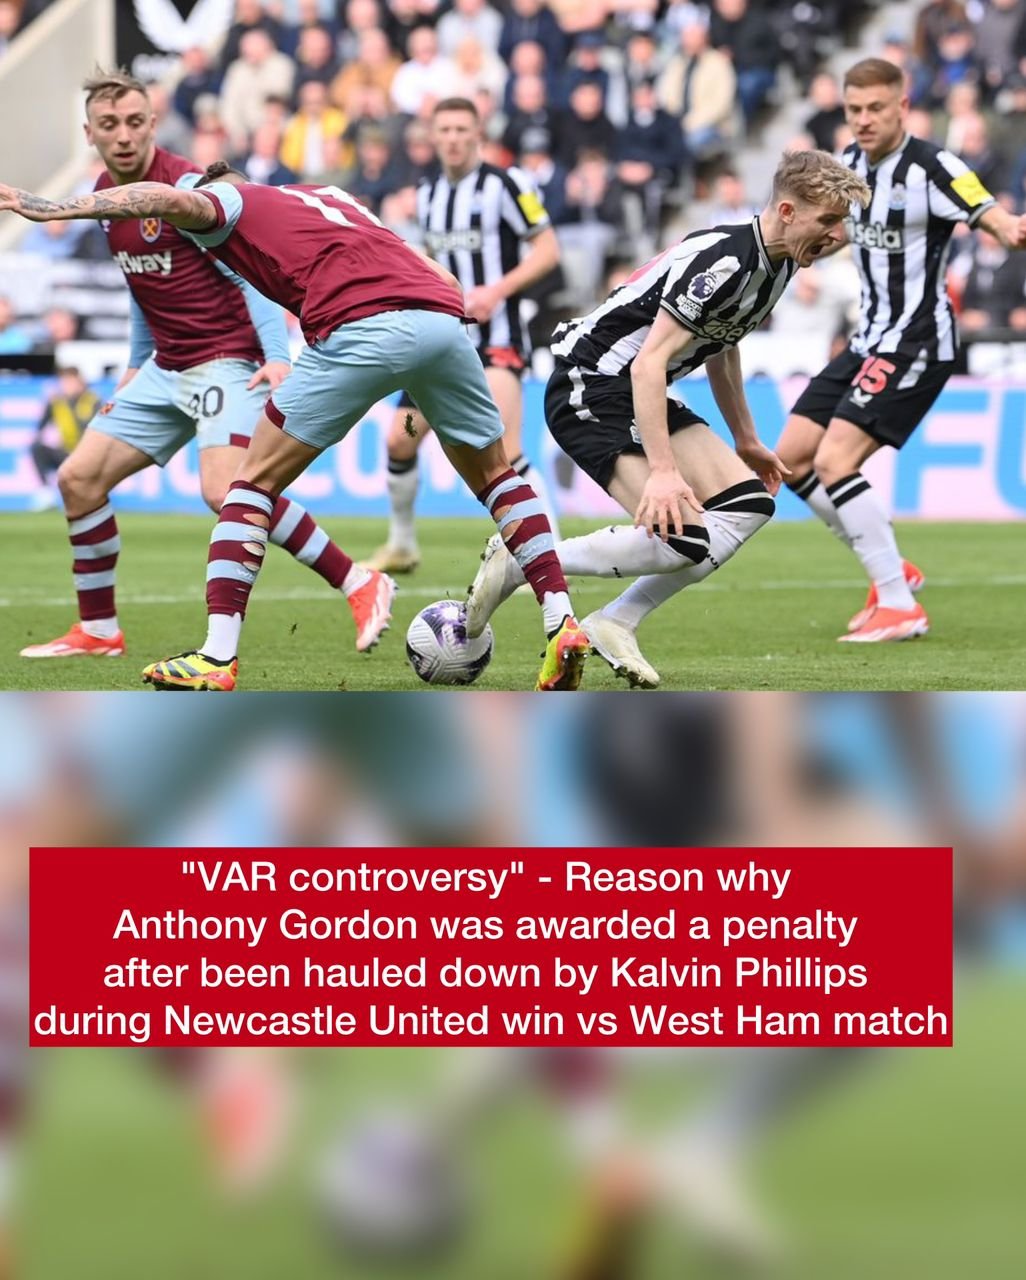 "VAR controversy" - Reason why Anthony Gordon was awarded a penalty after been hauled down by Kalvin Phillips during Newcastle United win vs West Ham match